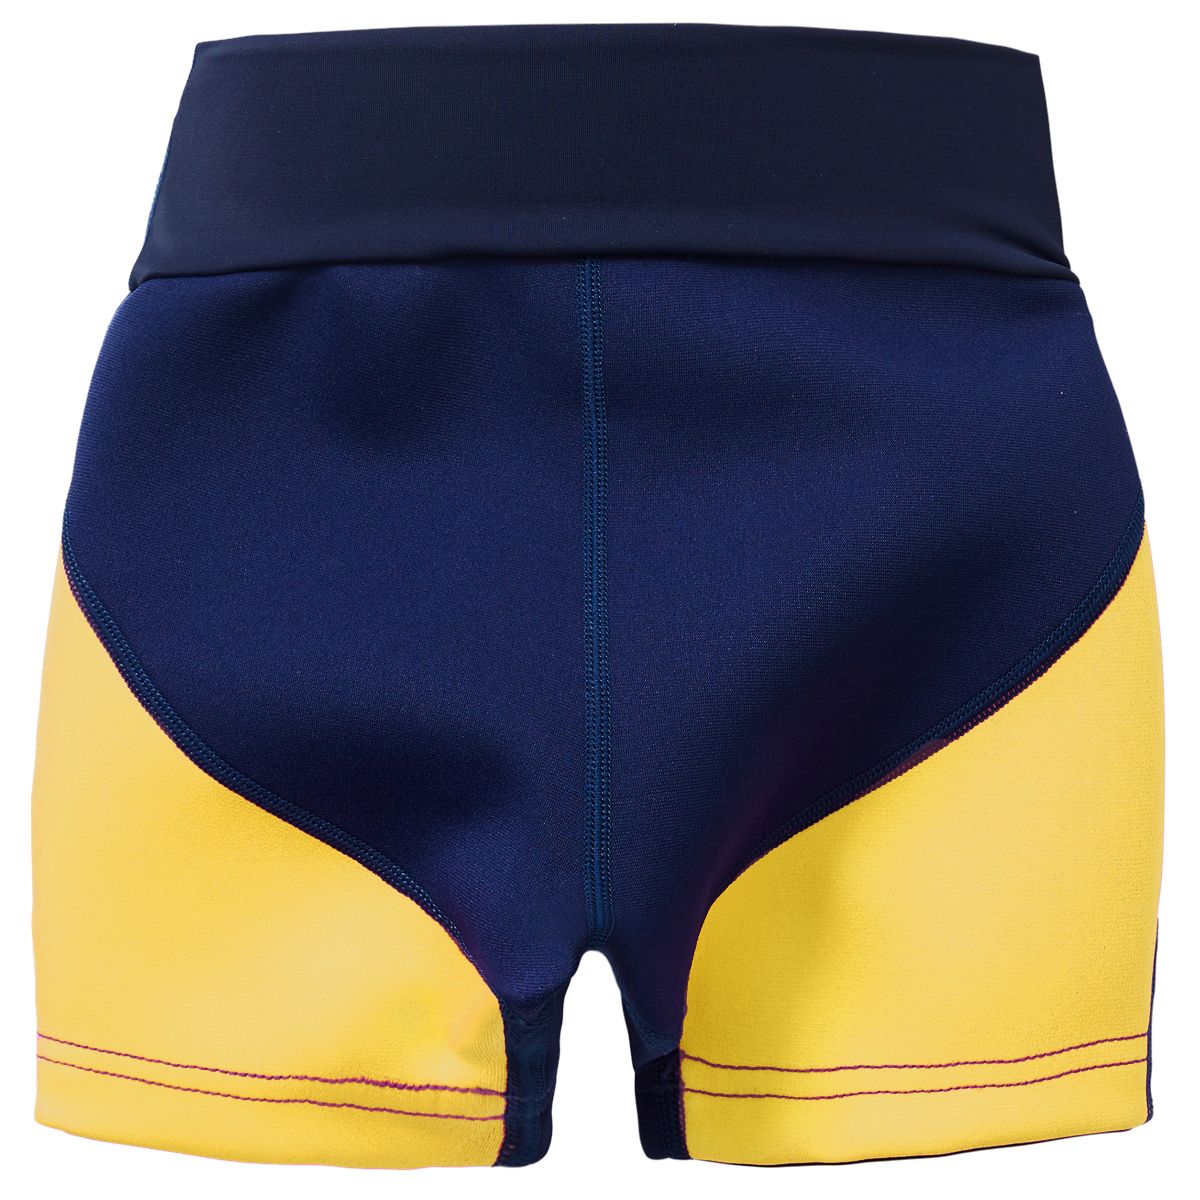 Neoprene swim shorts in navy blue with yellow trims. Back.